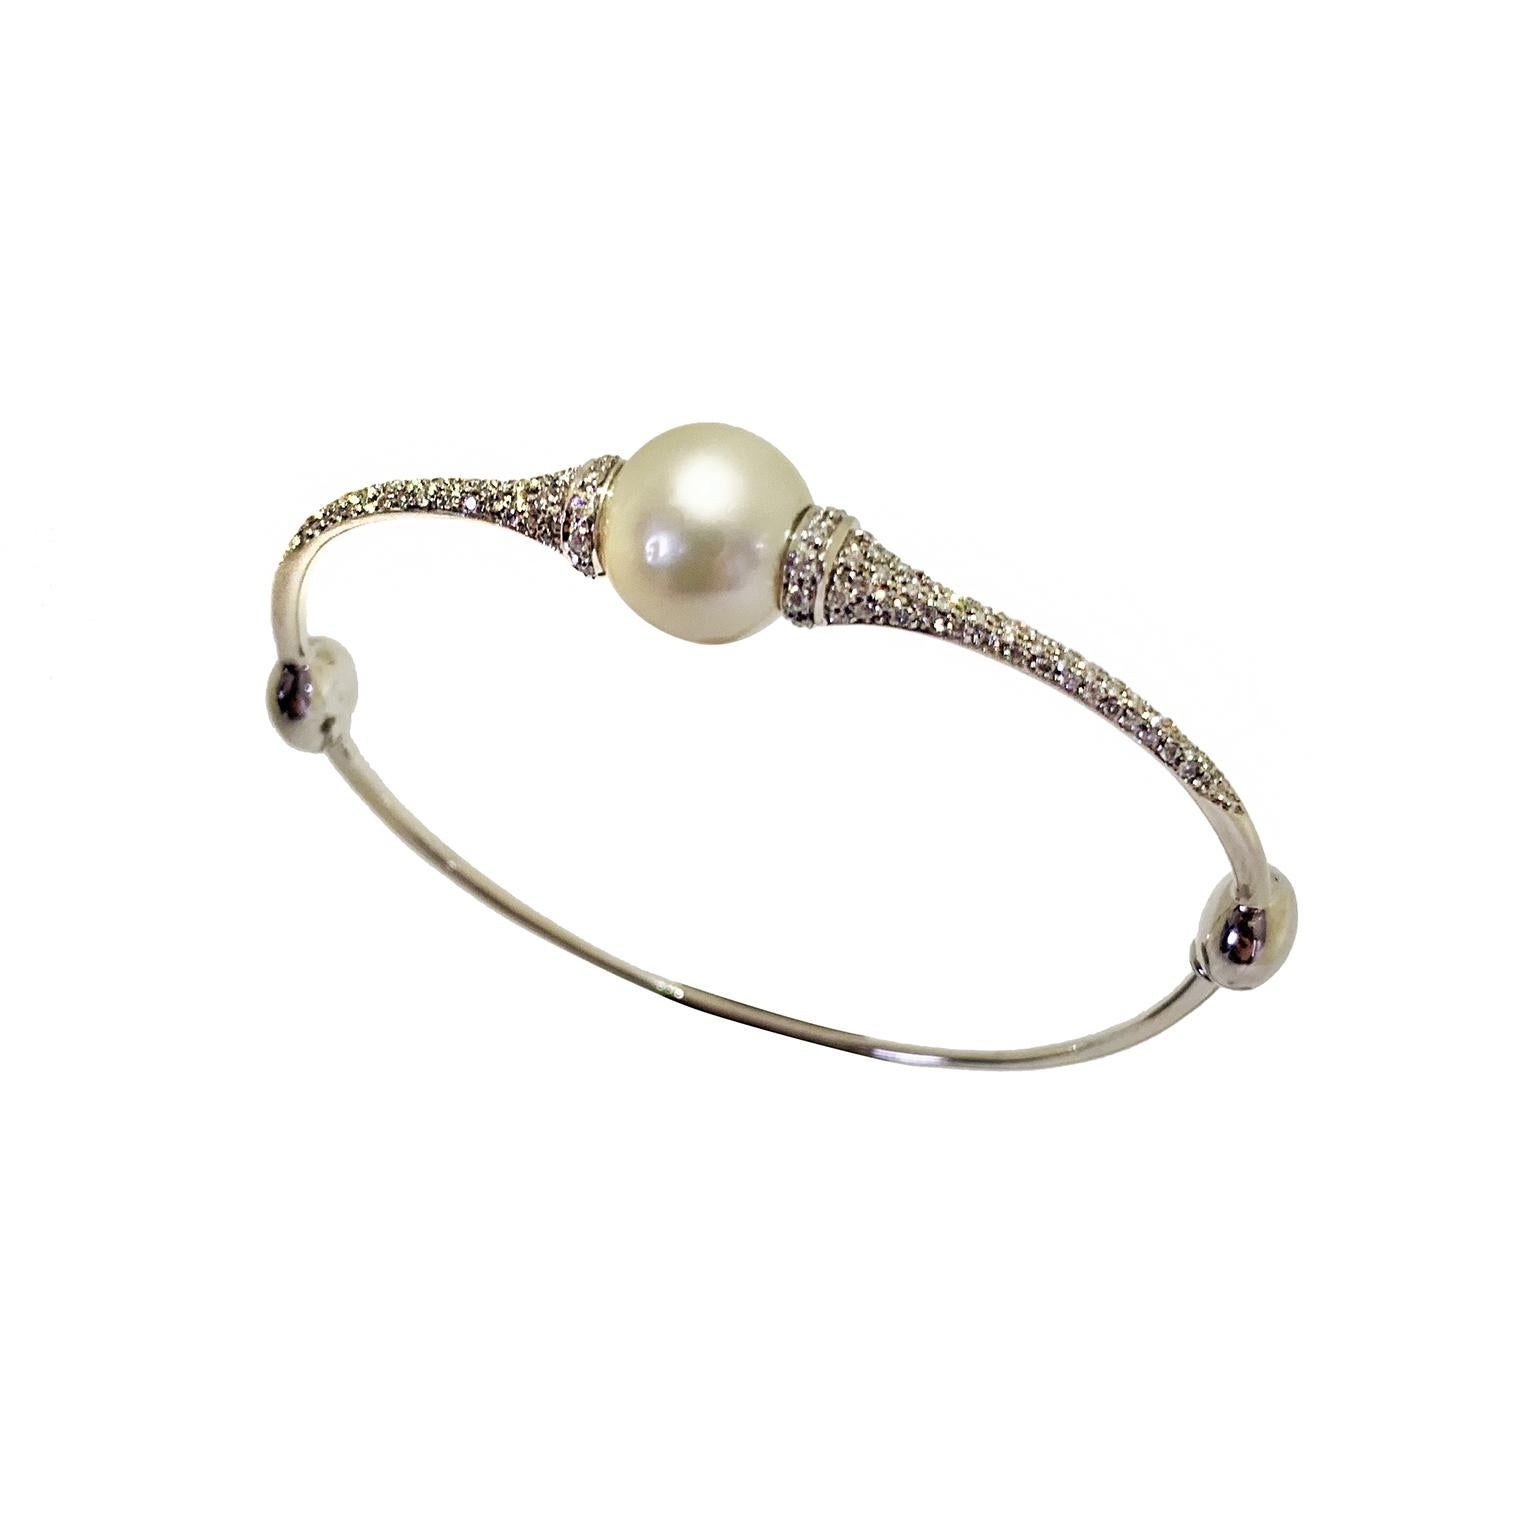 Sophisticated white gold bangle whit an nice Australian white pearl
total weight of the gold gr
total weight of the diamonds ct 0.56
stamp 750